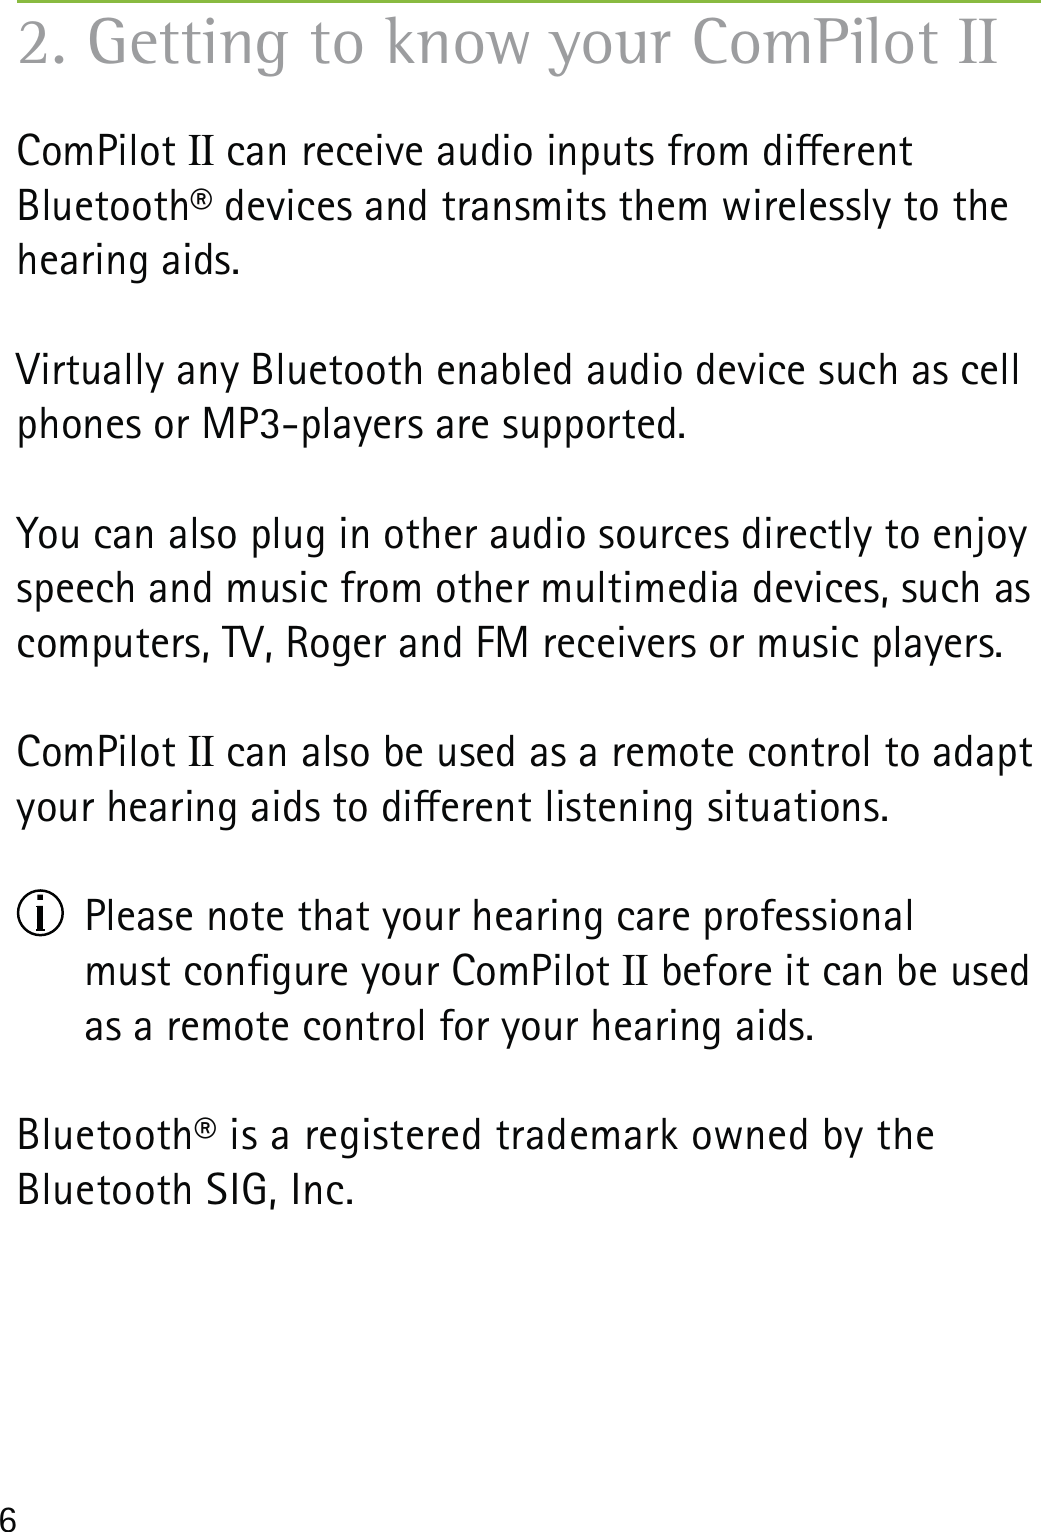 6ComPilot II can receive audio inputs from dierent  Bluetooth® devices and transmits them wirelessly to the hearing aids.Virtually any Bluetooth enabled audio device such as cell phones or MP3-players are supported.You can also plug in other audio sources directly to enjoy speech and music from other multimedia devices, such as computers, TV, Roger and FM receivers or music players.ComPilot II can also be used as a remote control to adapt your hearing aids to dierent listening situations.   Please note that your hearing care professional  must congure your ComPilot II before it can be used as a remote control for your hearing aids. Bluetooth® is a registered trademark owned by the  Bluetooth SIG, Inc.2. Getting to know your ComPilot II